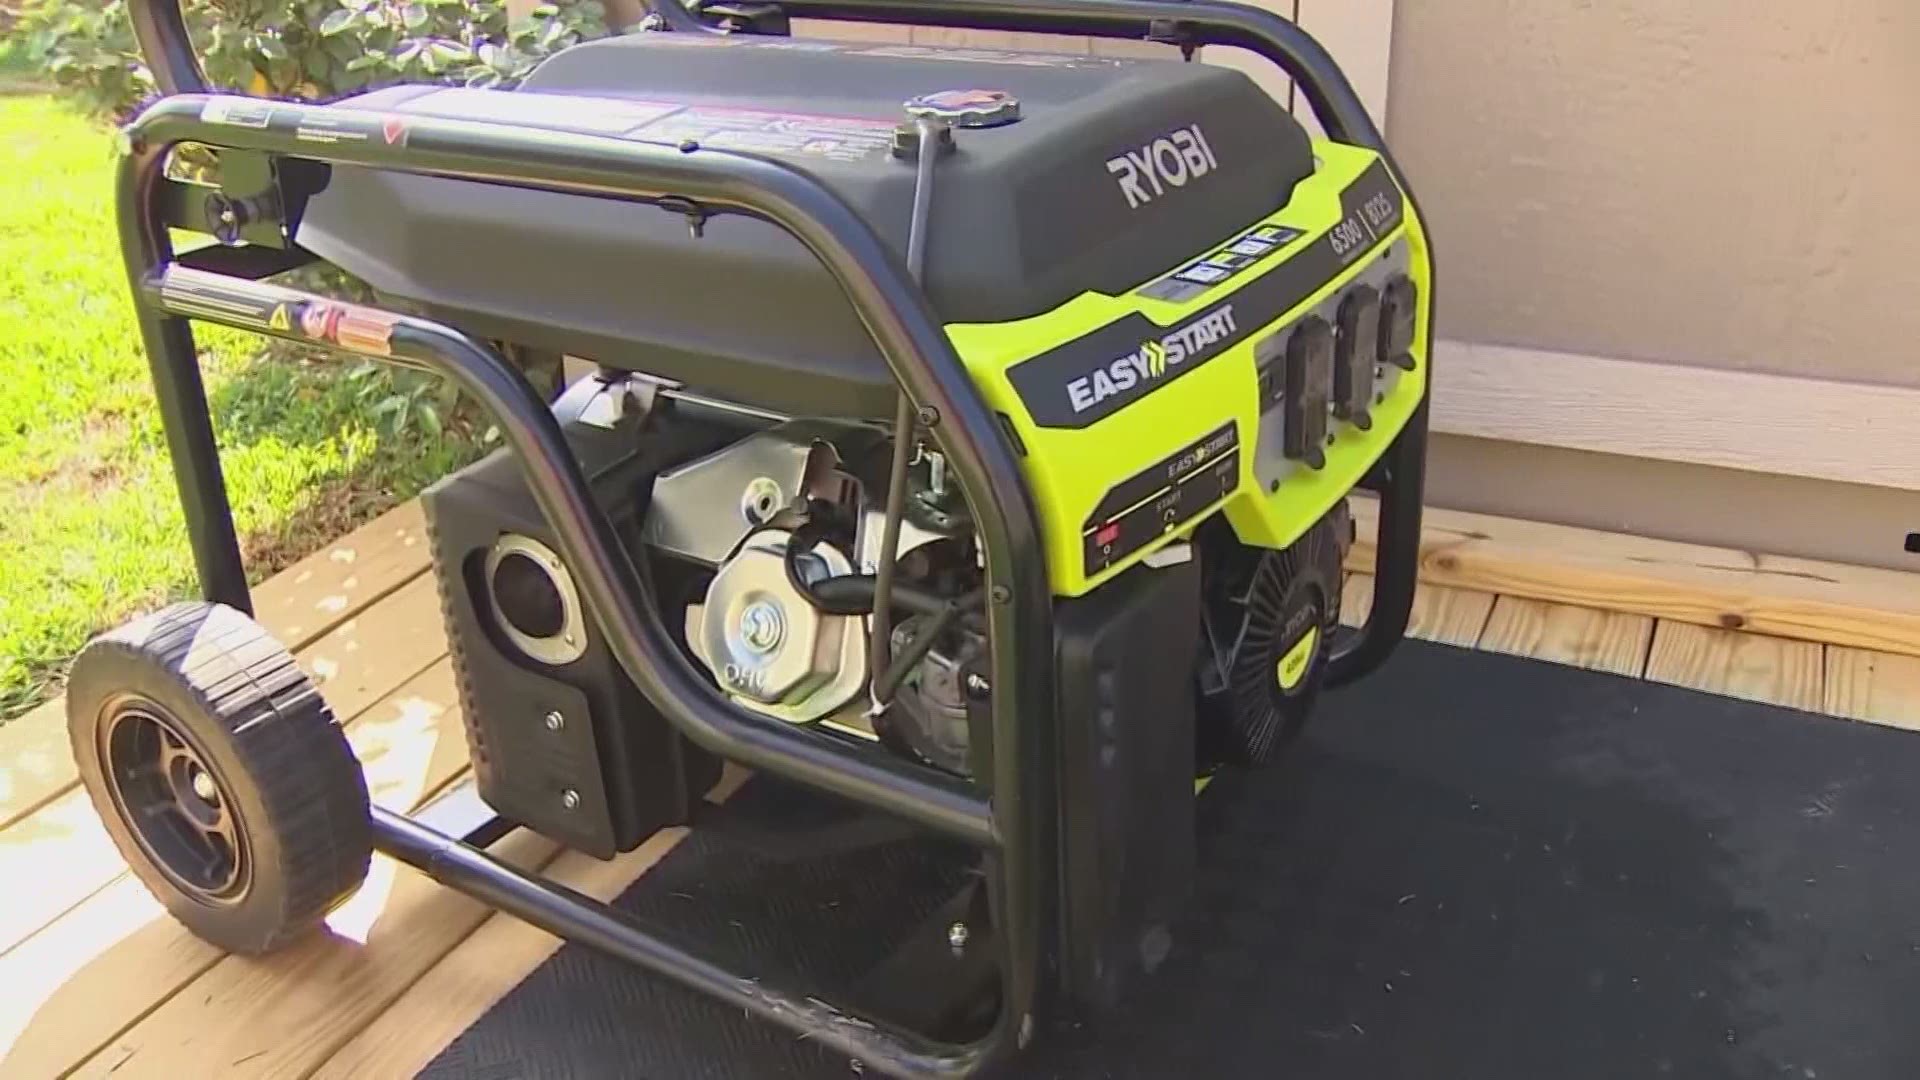 Everything you need to know about generators, from what size to buy, how they work, how to maintain them, portable units vs whole house.